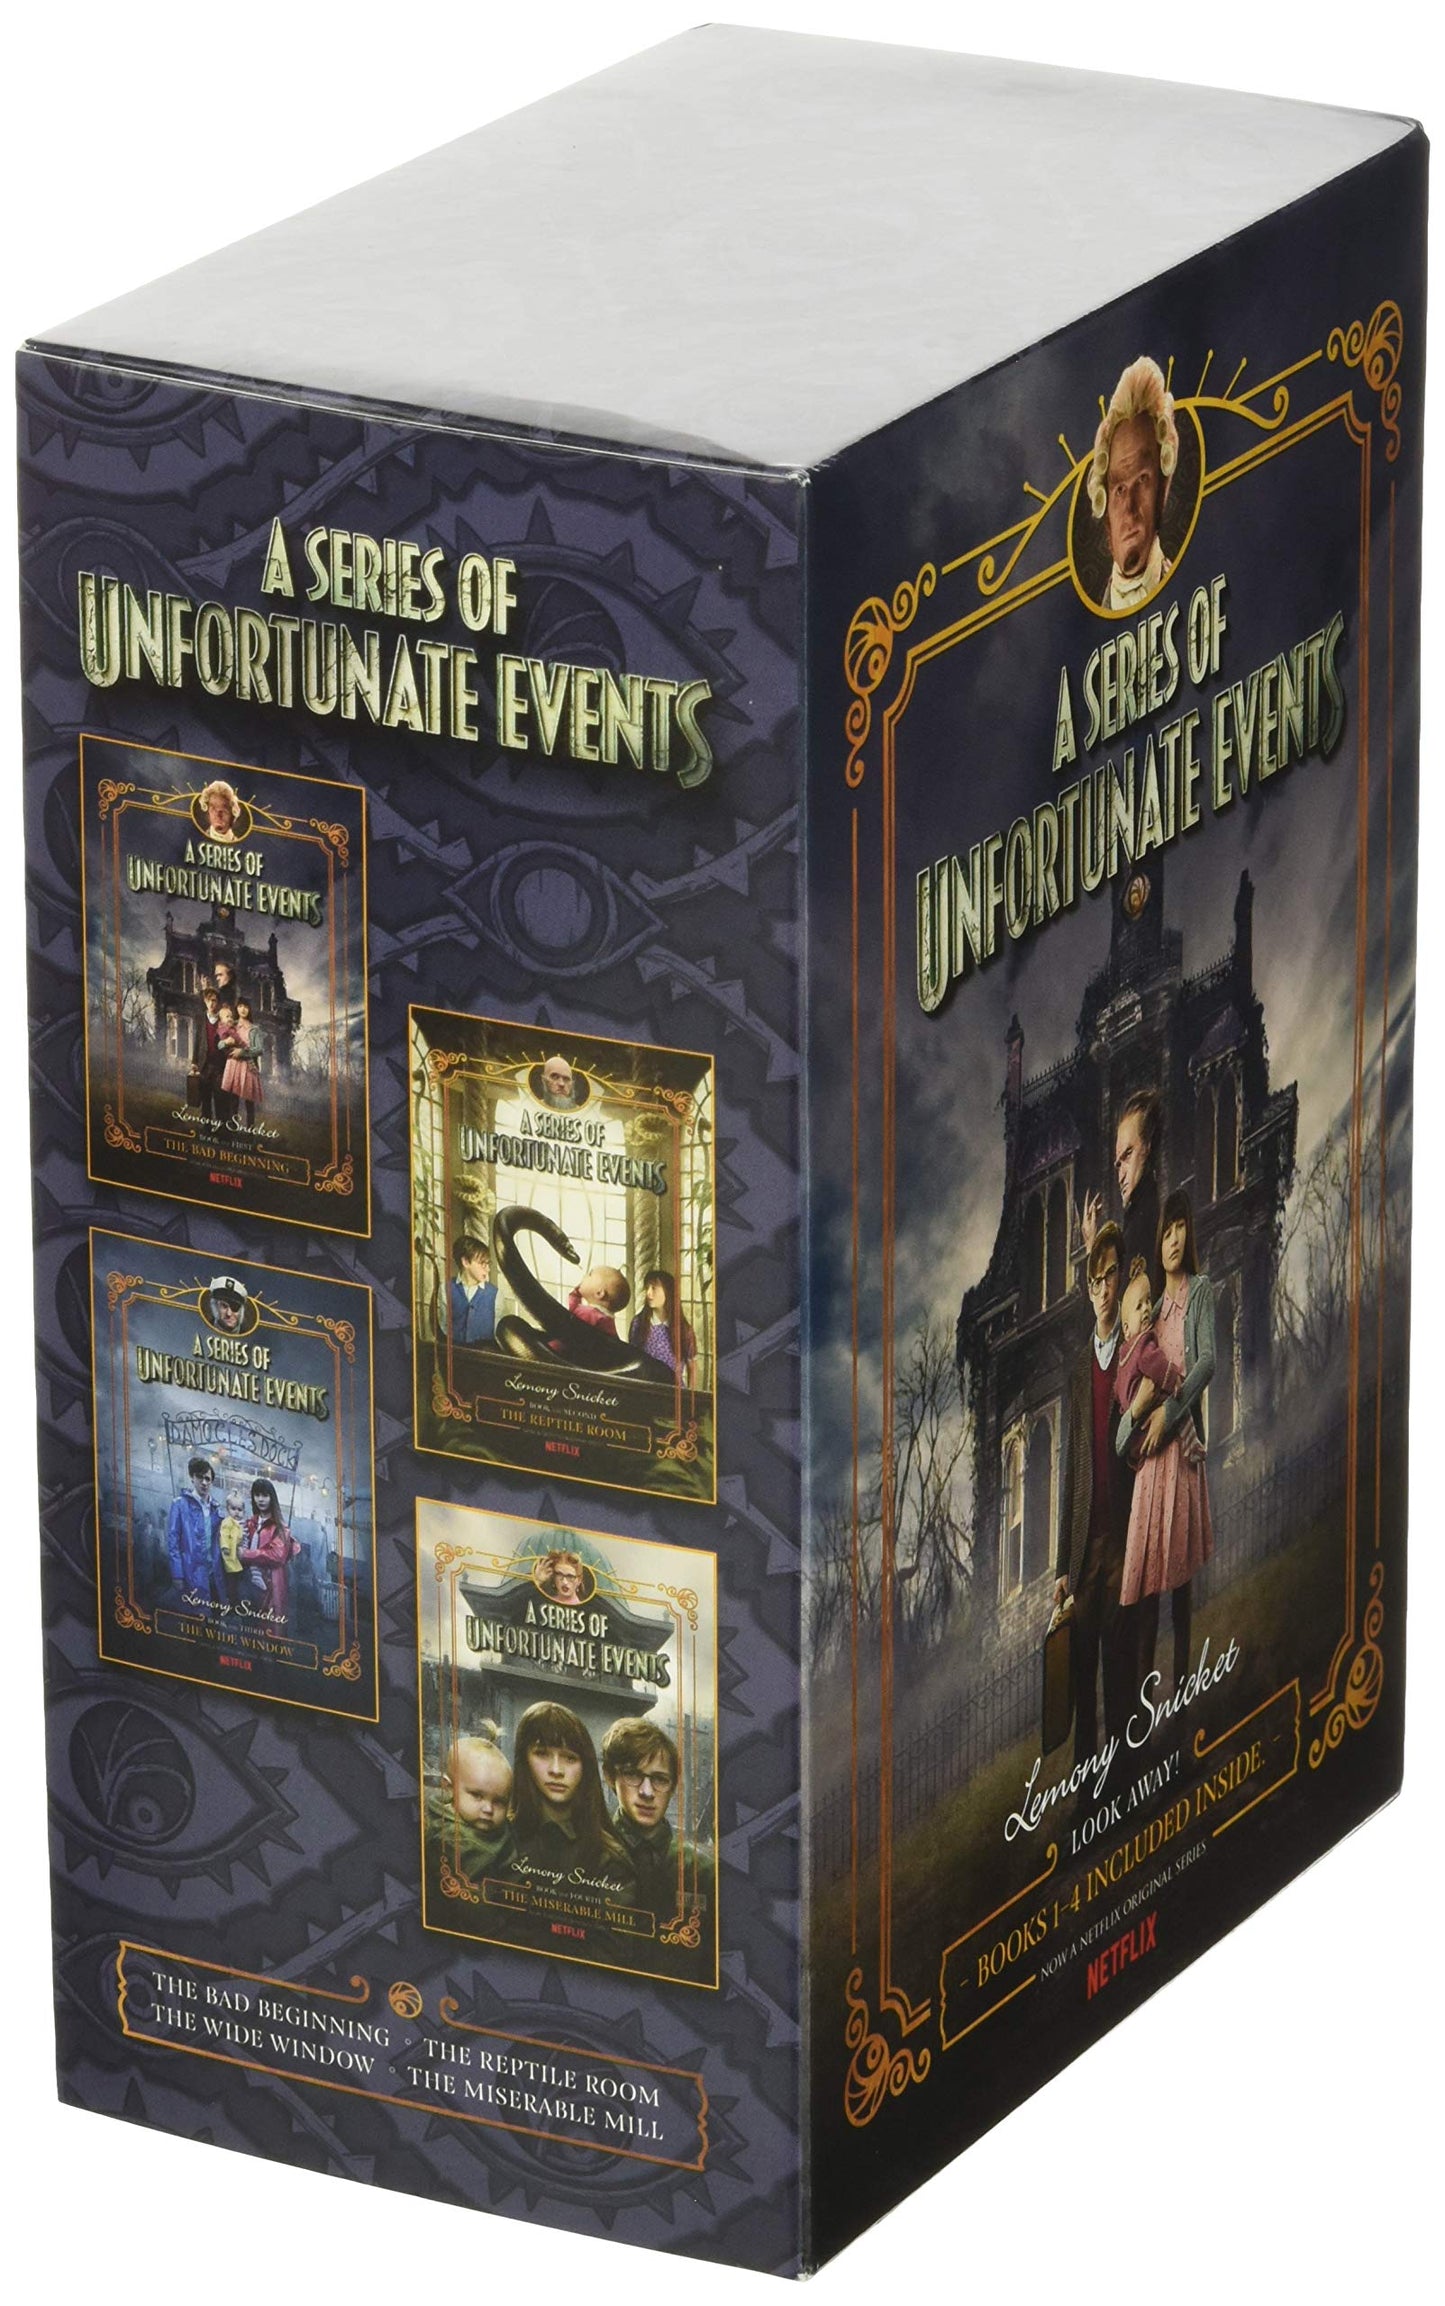 A Series of Unfortunate Events #1-4 Netflix Tie-in Box Set - Lemony Snicket